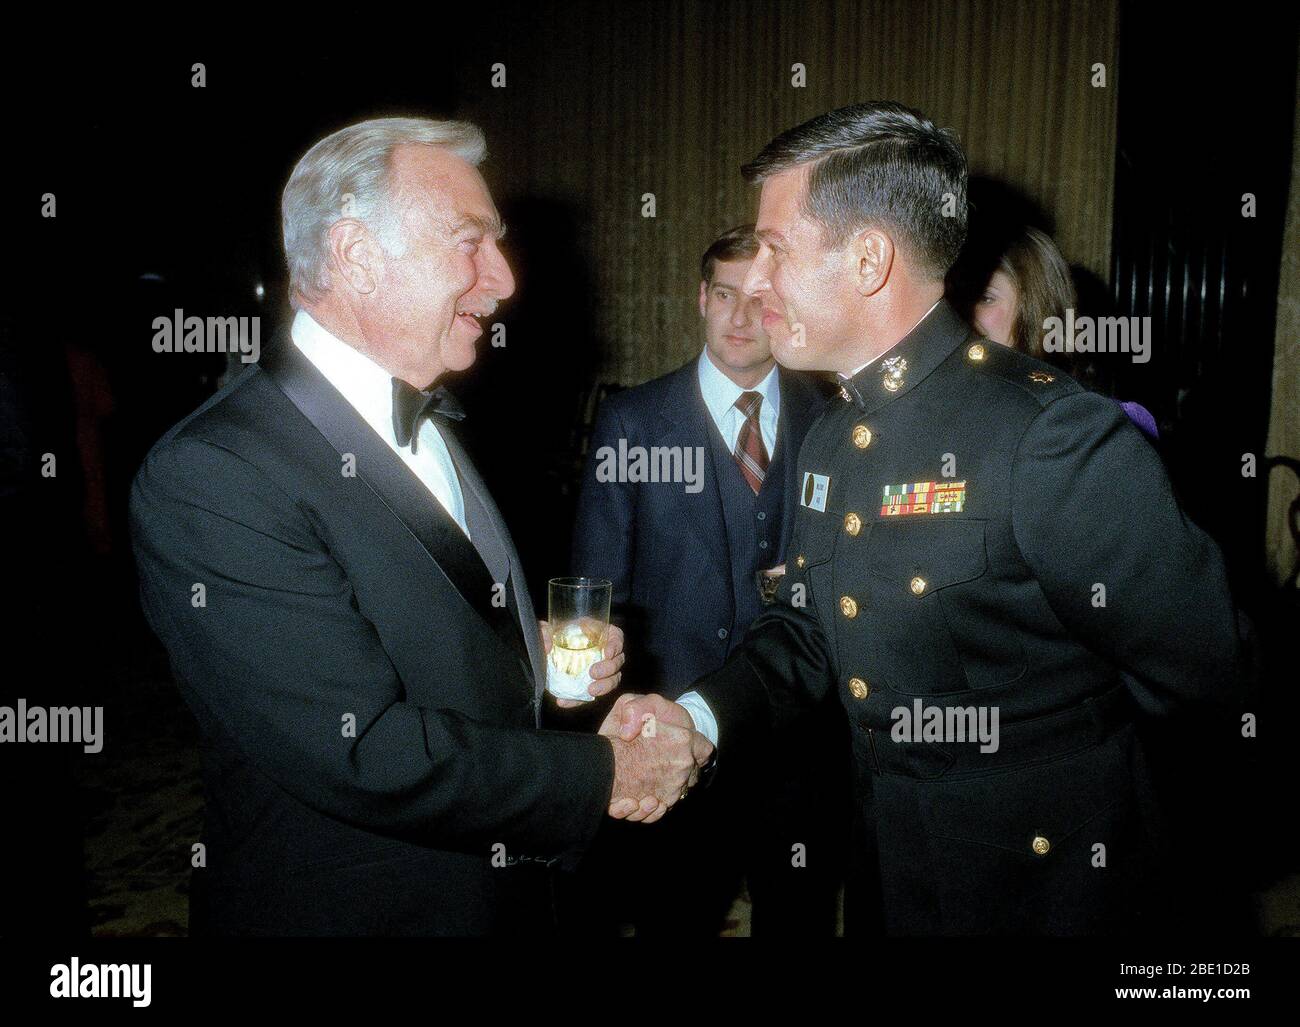 A Marine Corps major shakes hands with Walter Cronkite, the famous radio and television commentator, at the Kennedy Center Inaugural Ball. Stock Photo